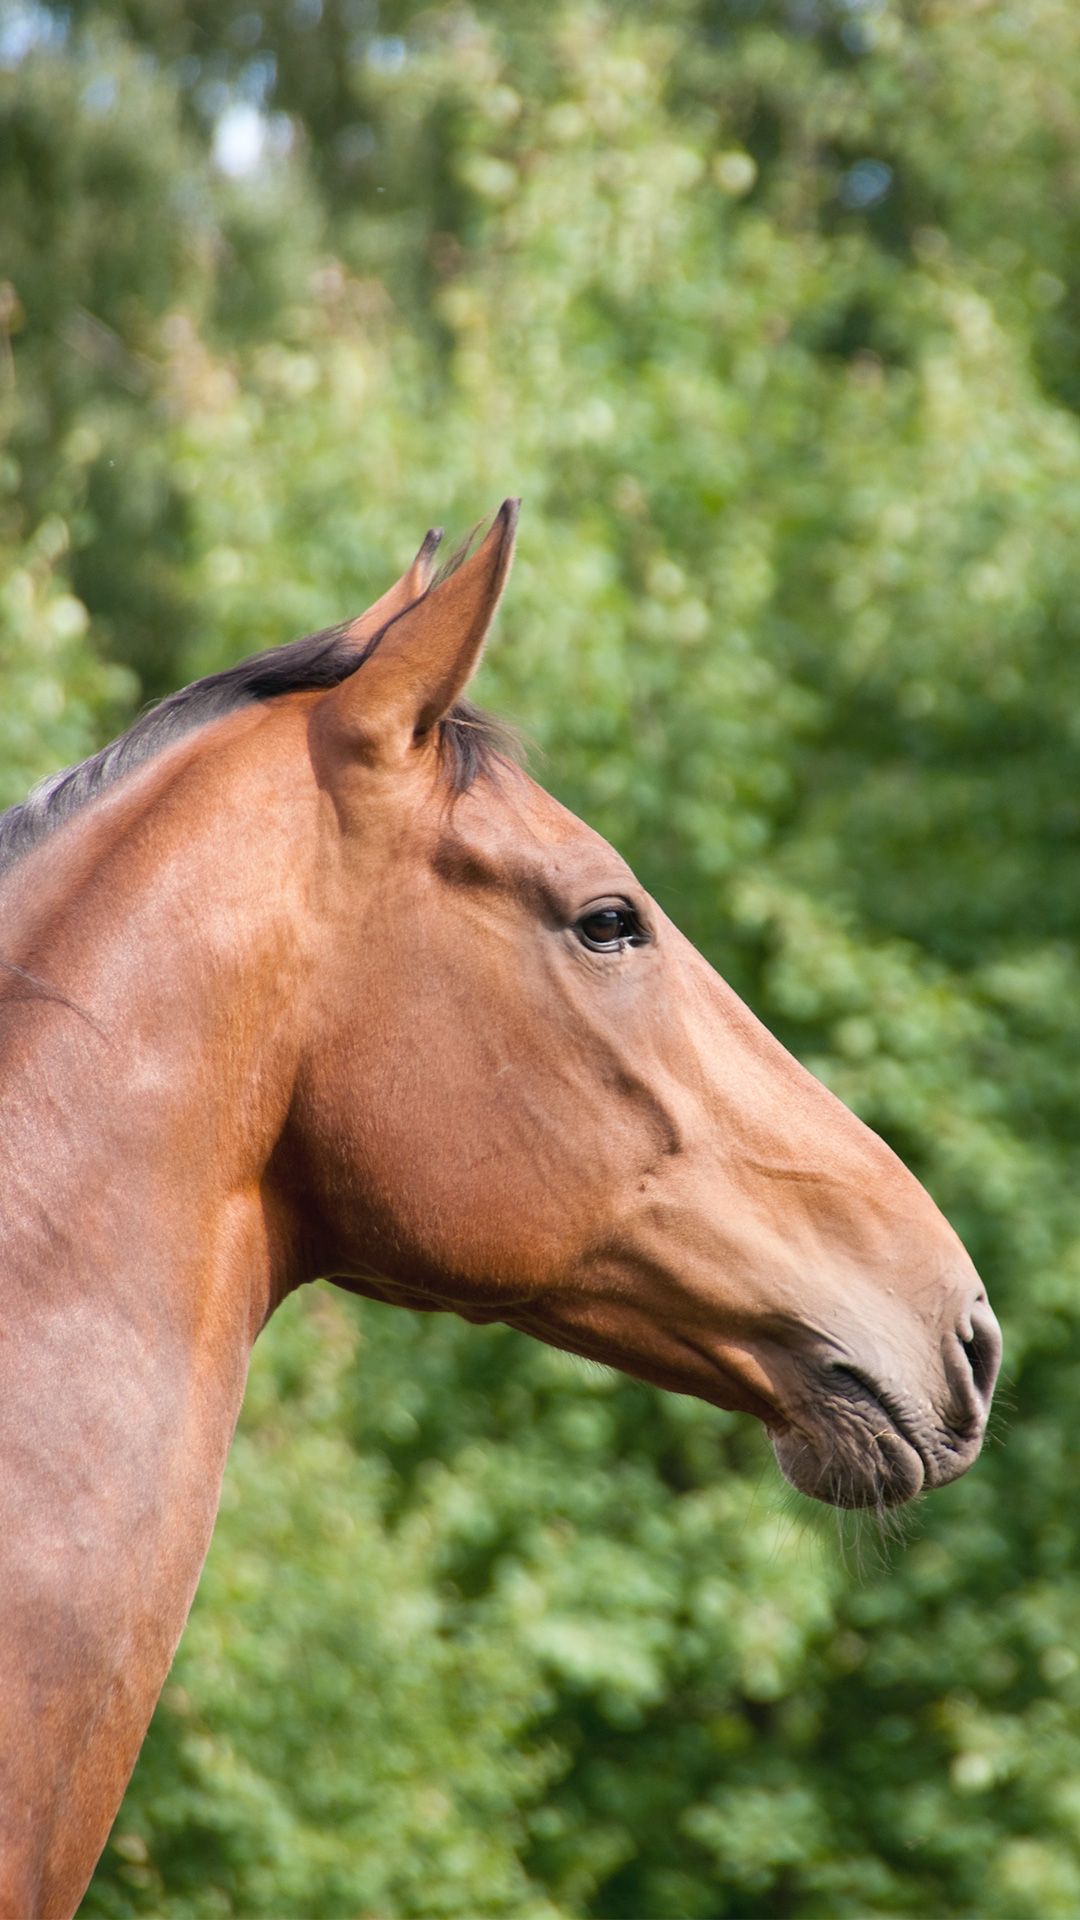 Stereotypical Behavior in Horses